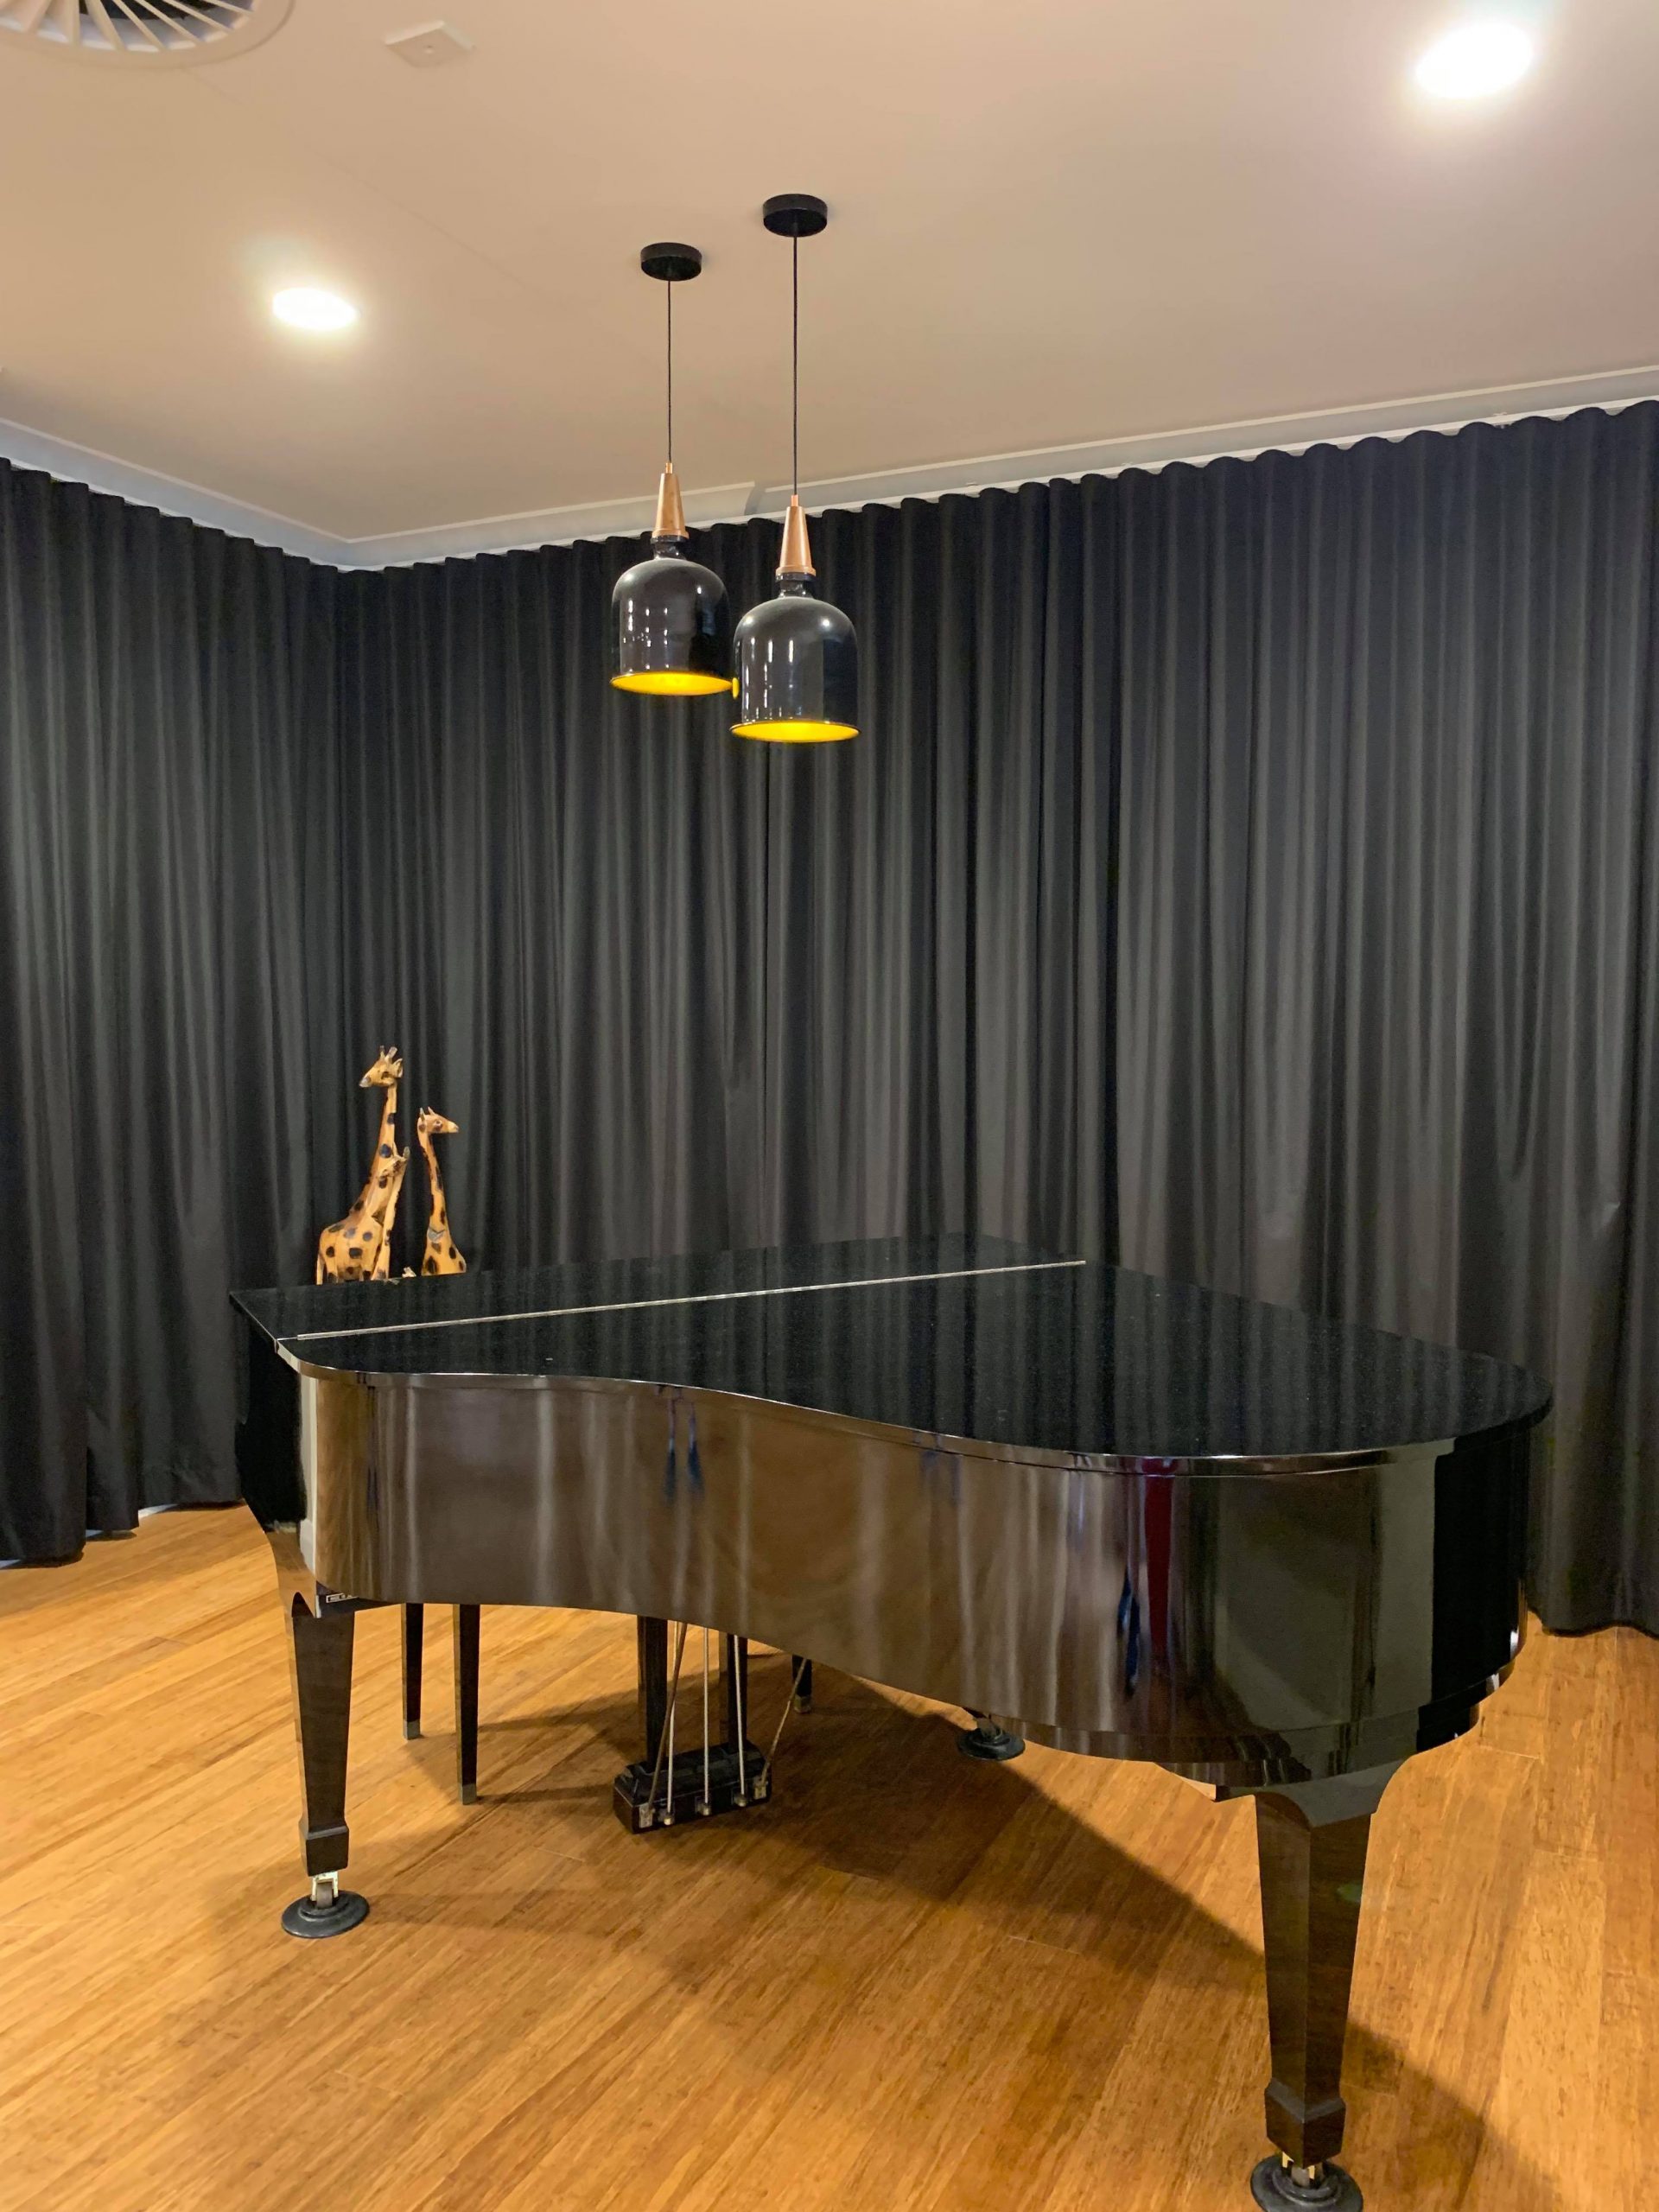 A black baby grand piano in a game room with heavy dark curtains | Game Room Curtains Blog Featured Image